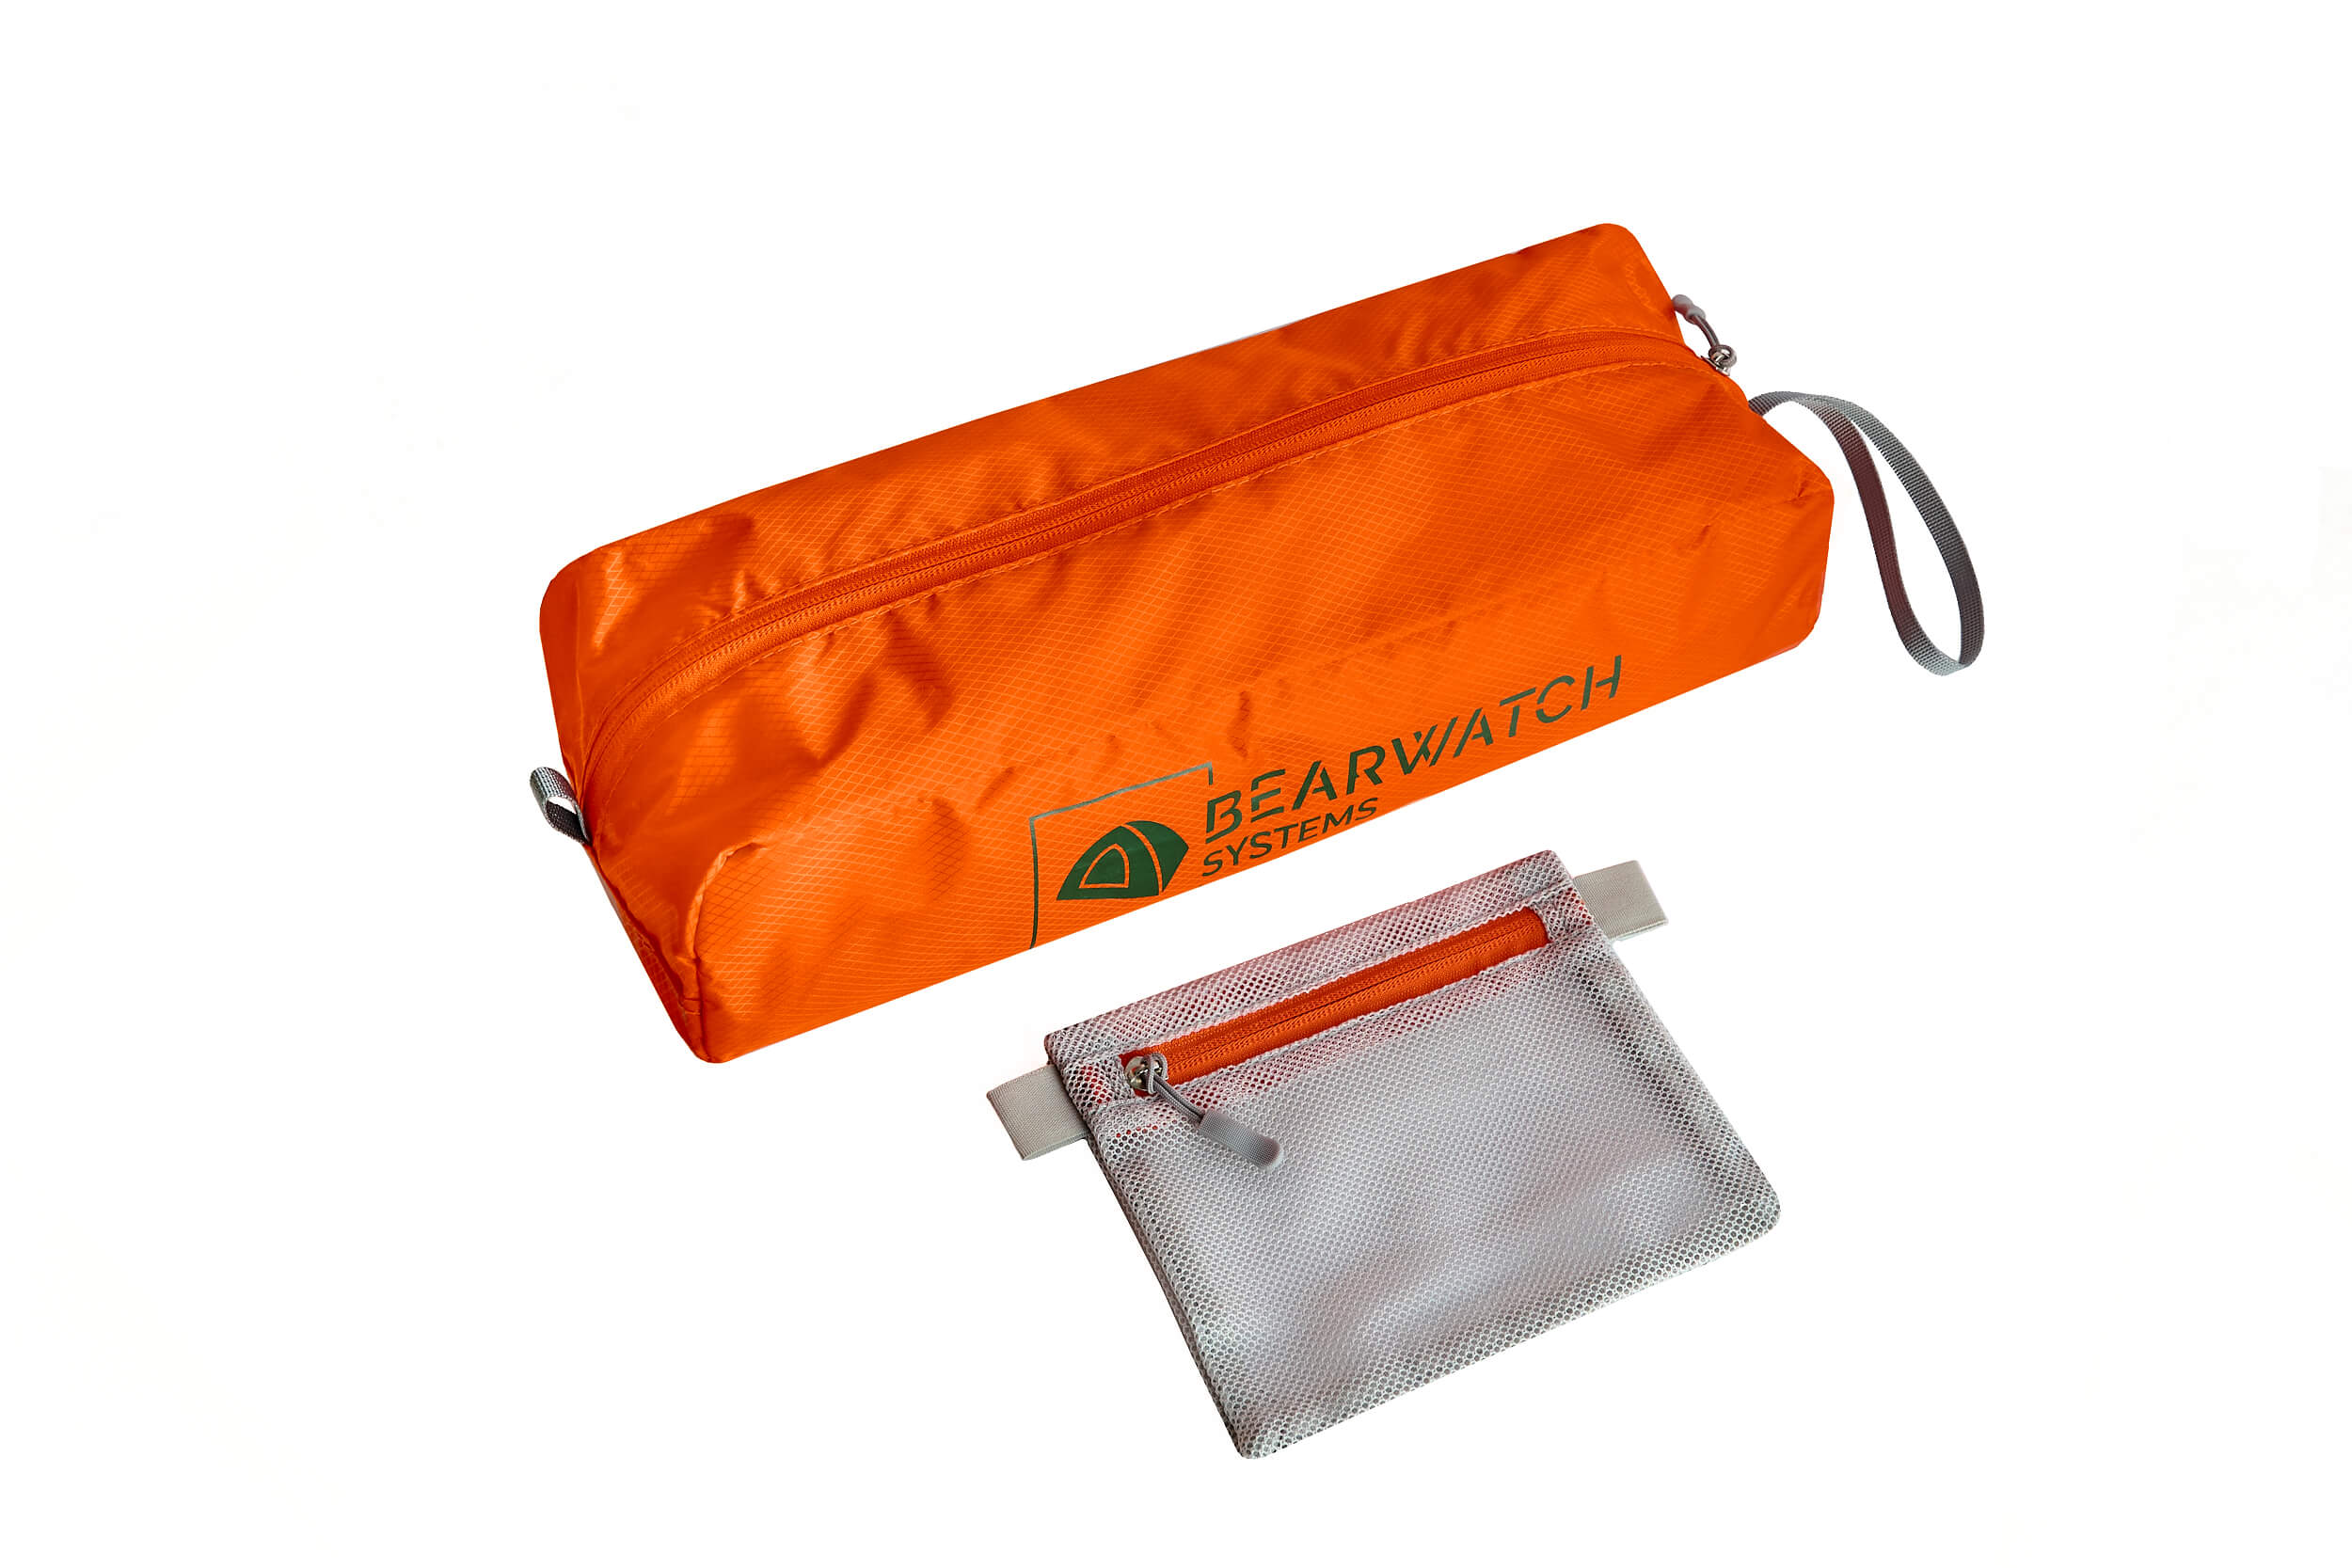 Water-resistant orange storage bag with pouch